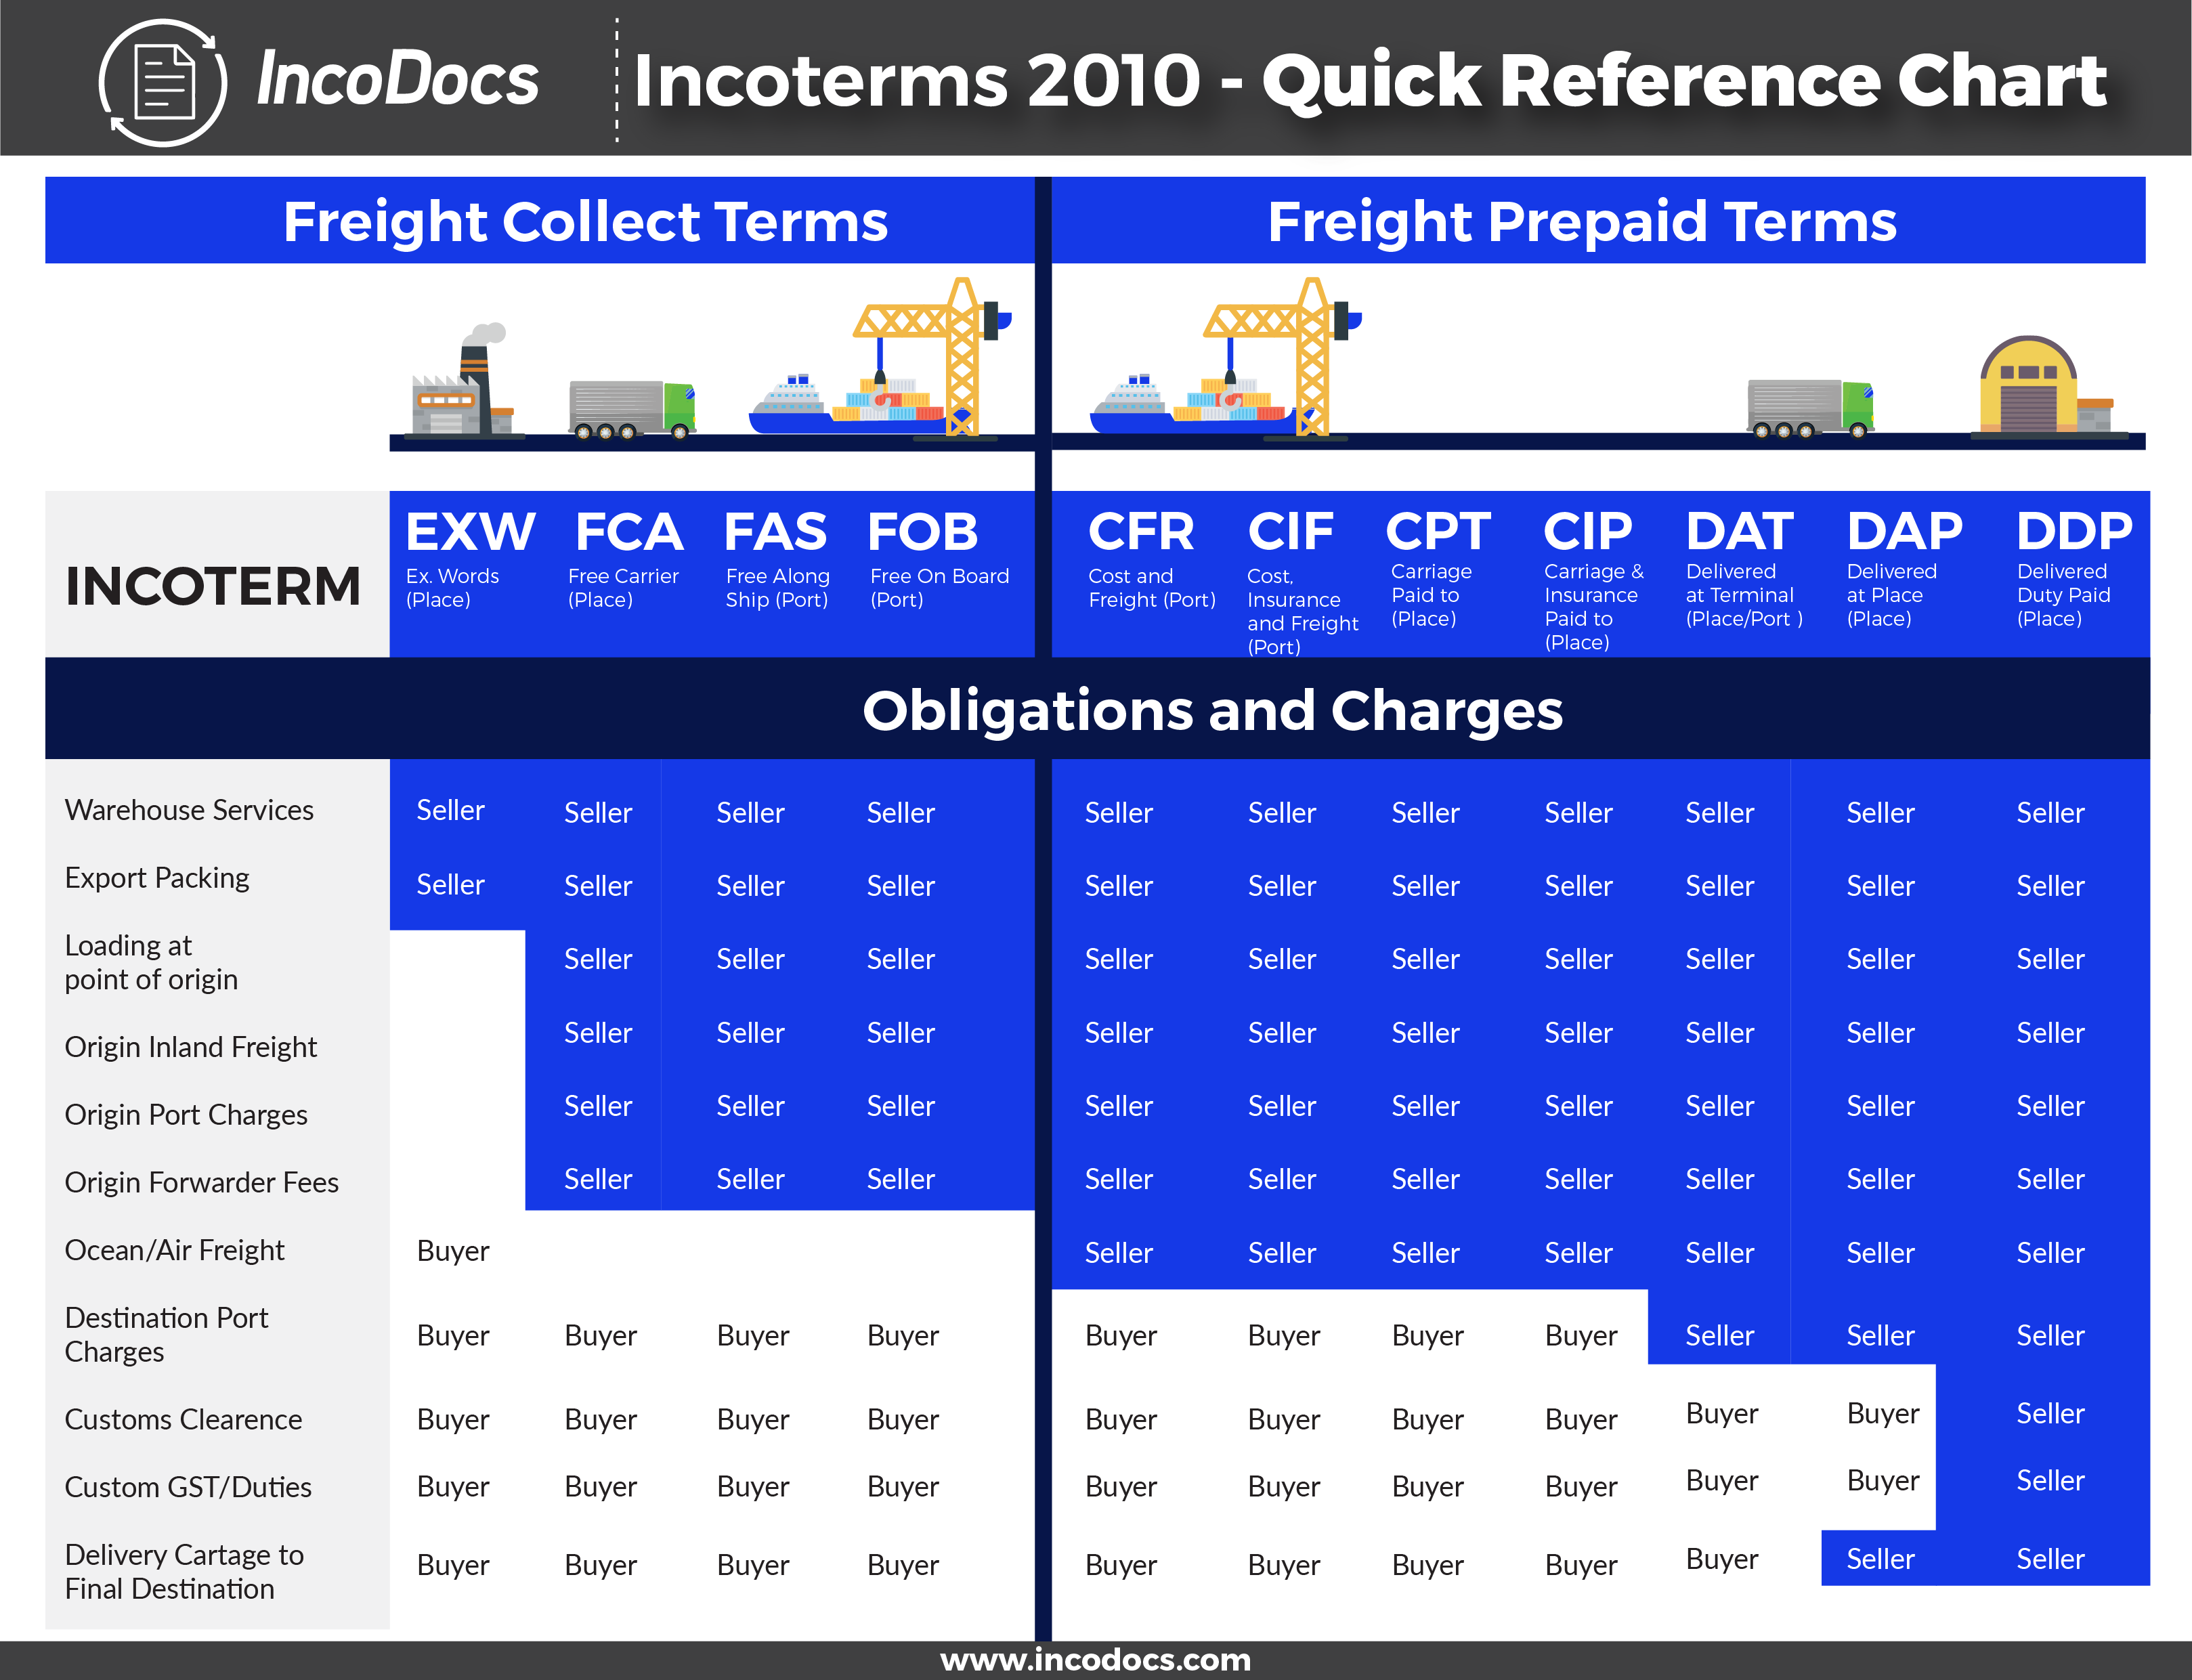 Incoterms® Explained The Complete Guide Incodocs 4555